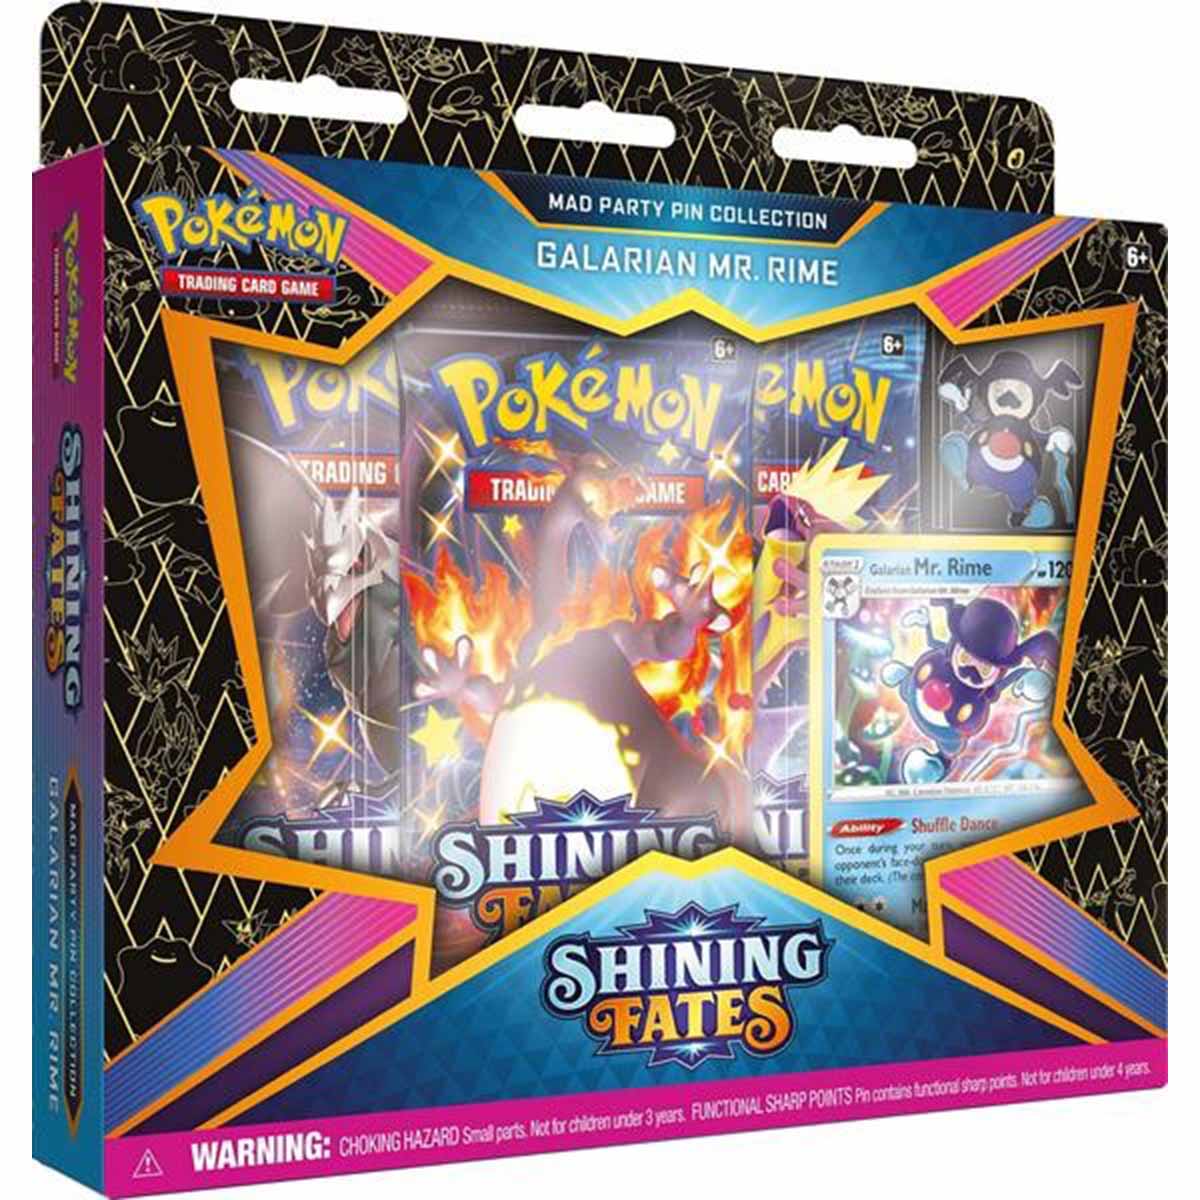 Pokémon Shining Fates Mad Party Pin Collection Galarian Mr. Rime